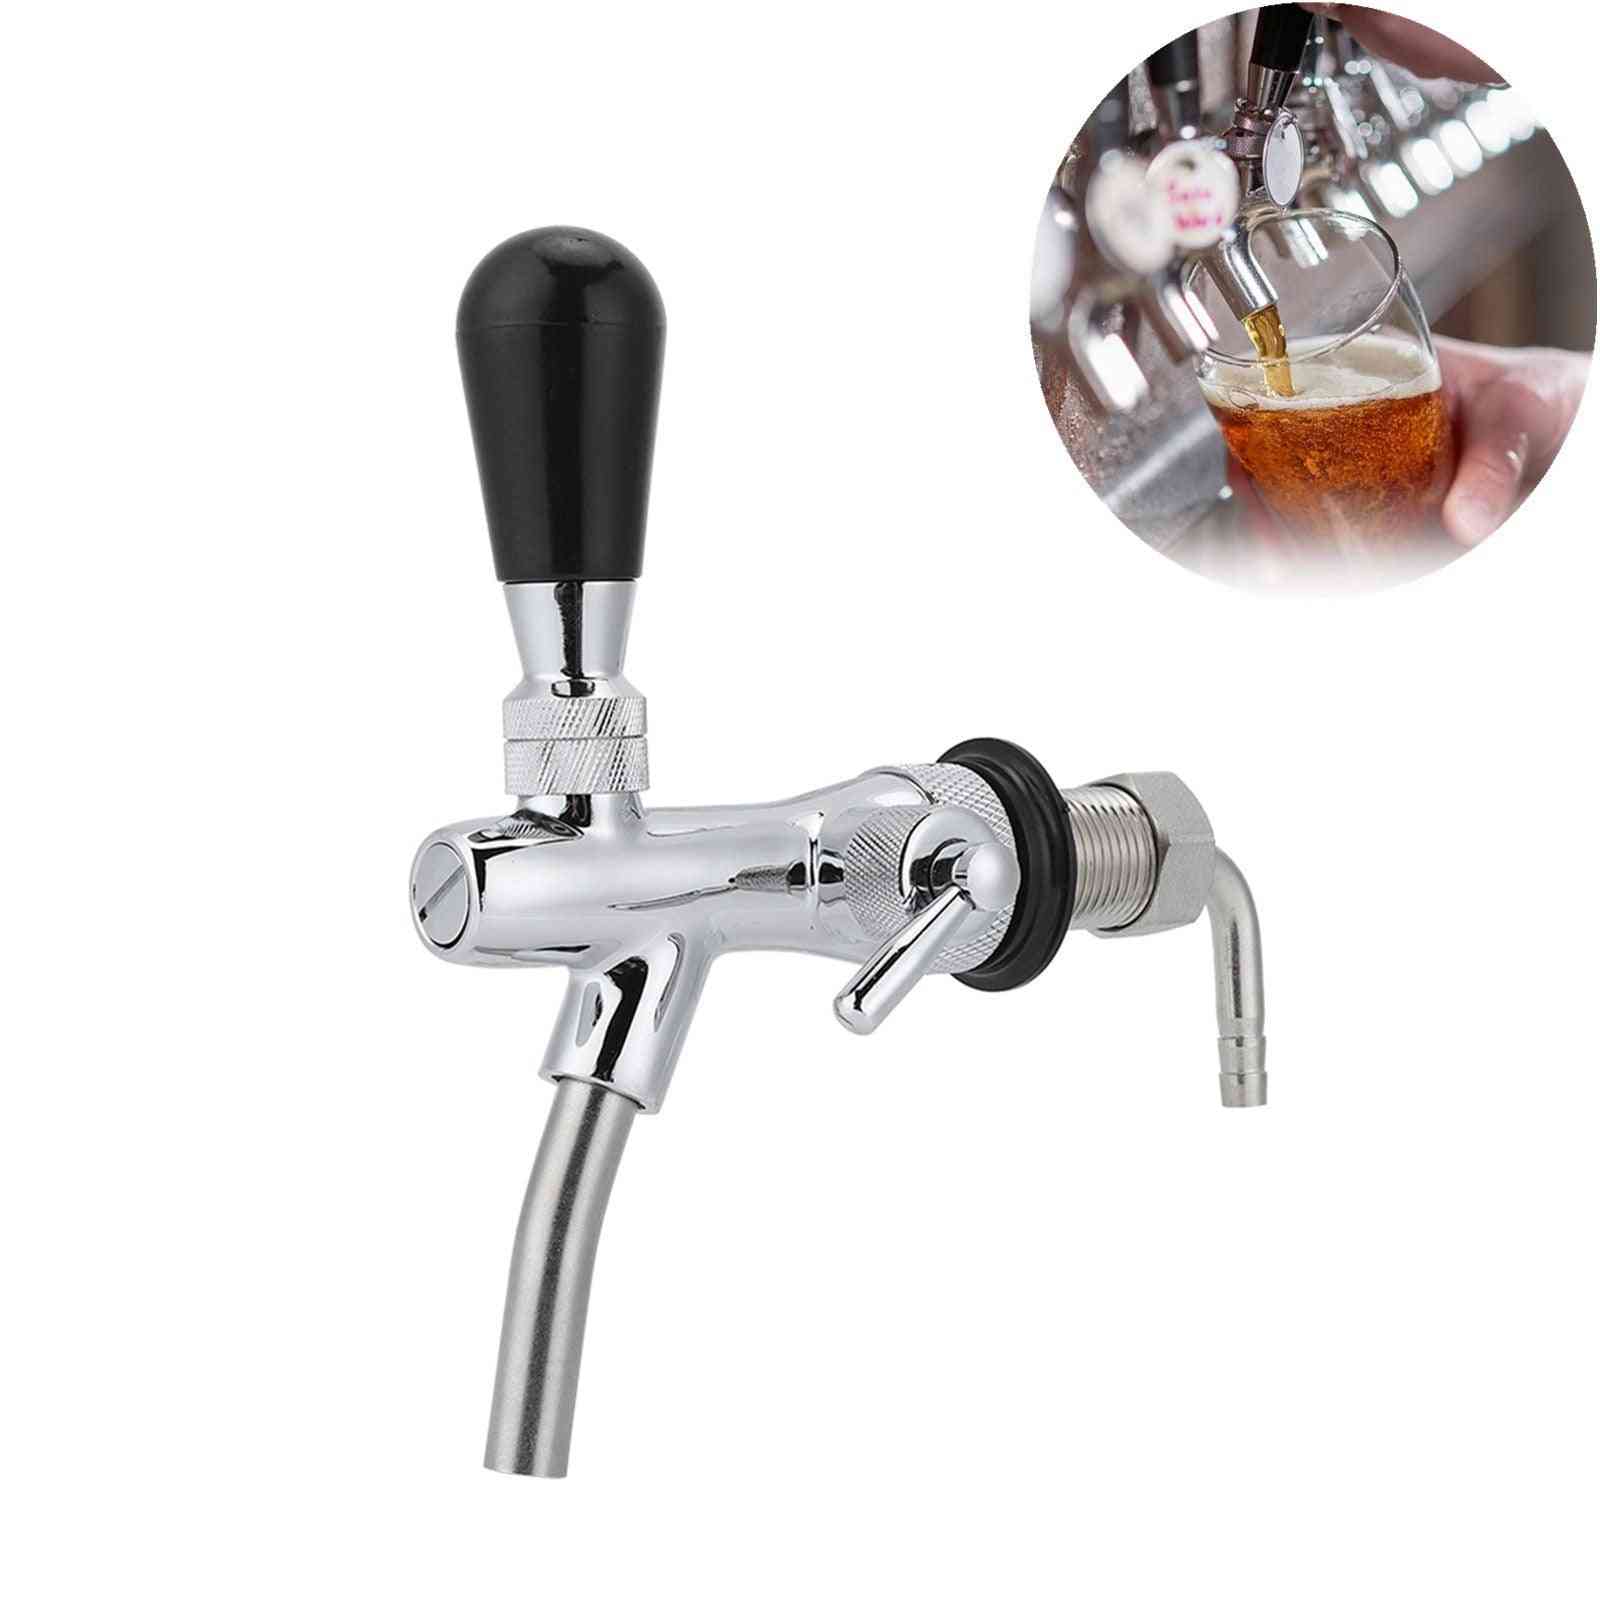 Thread Adjustable Beer Tap Faucet With Chroming Brass